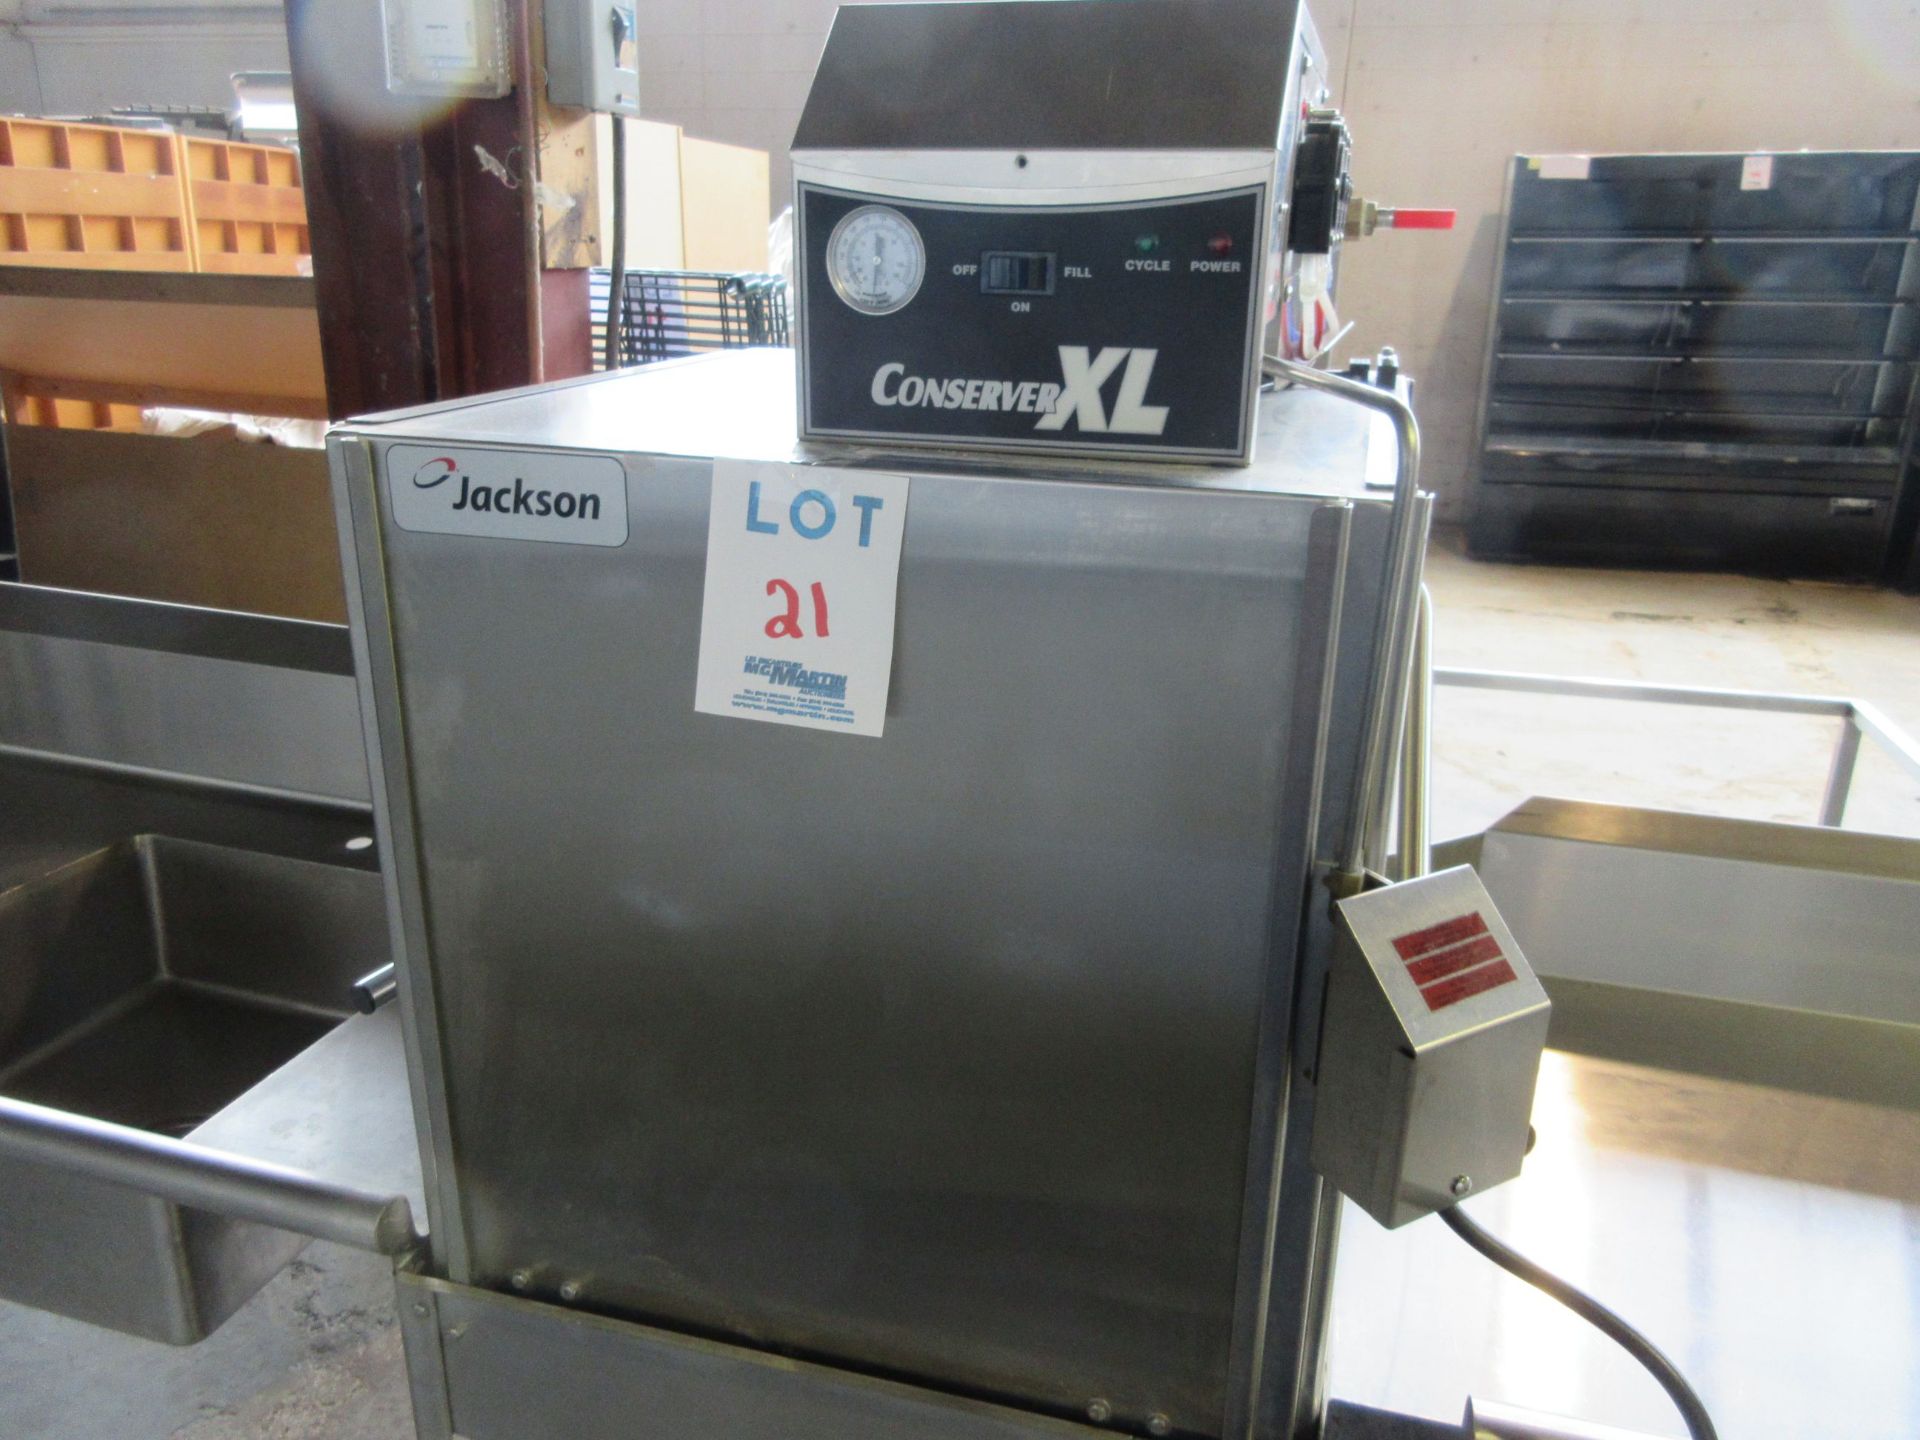 JACKSON Conserver XL Commercial Dishwasher. (Mod: Conserver XL). Approx. (111”w x 30”d x 66”h) - Image 2 of 4